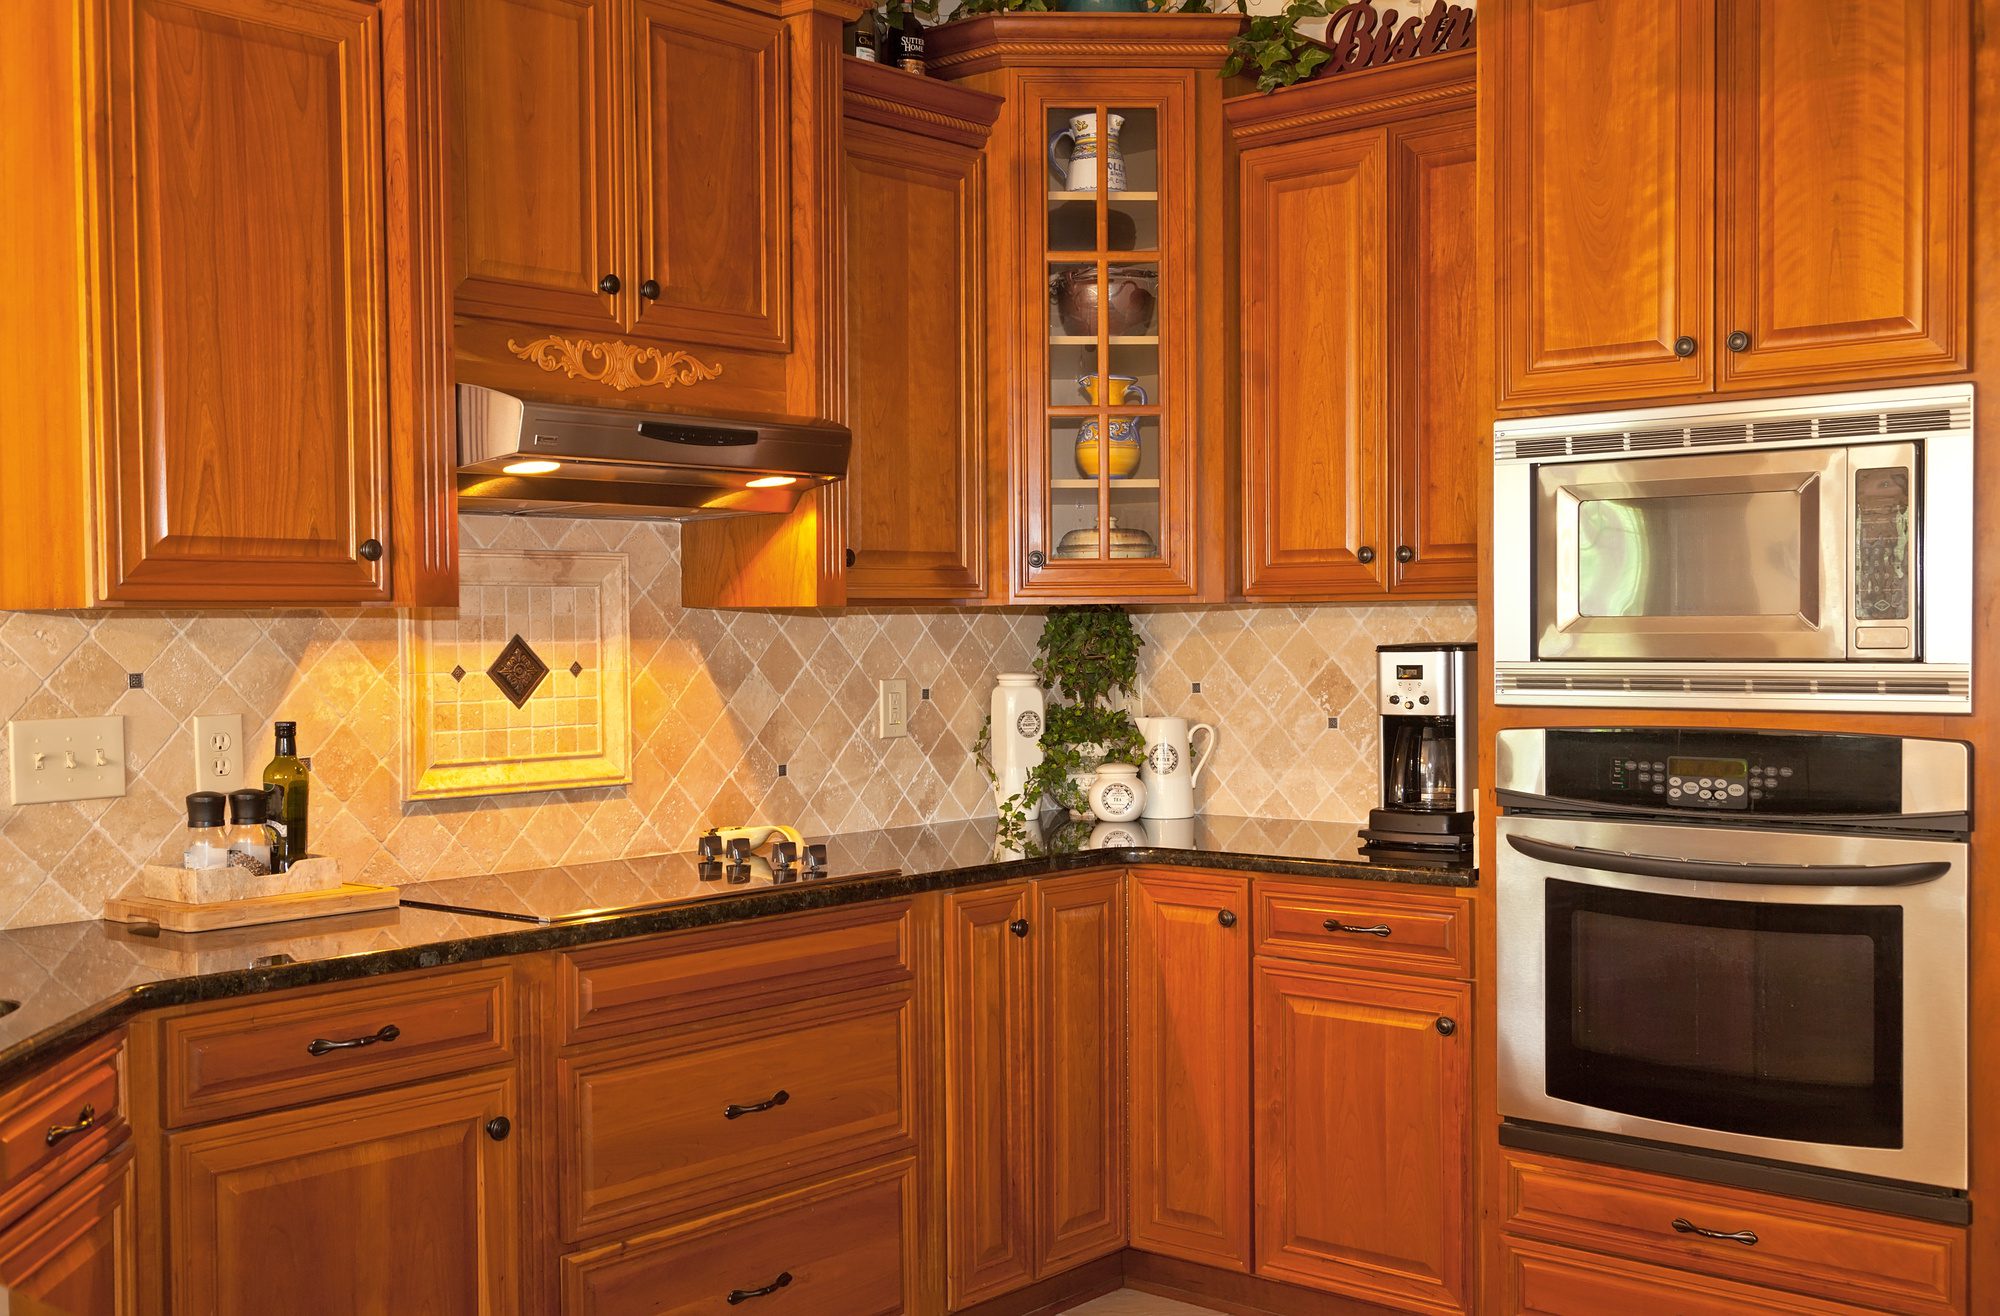 Kitchen Cabinet Dimensions Your Guide To The Standard Sizes